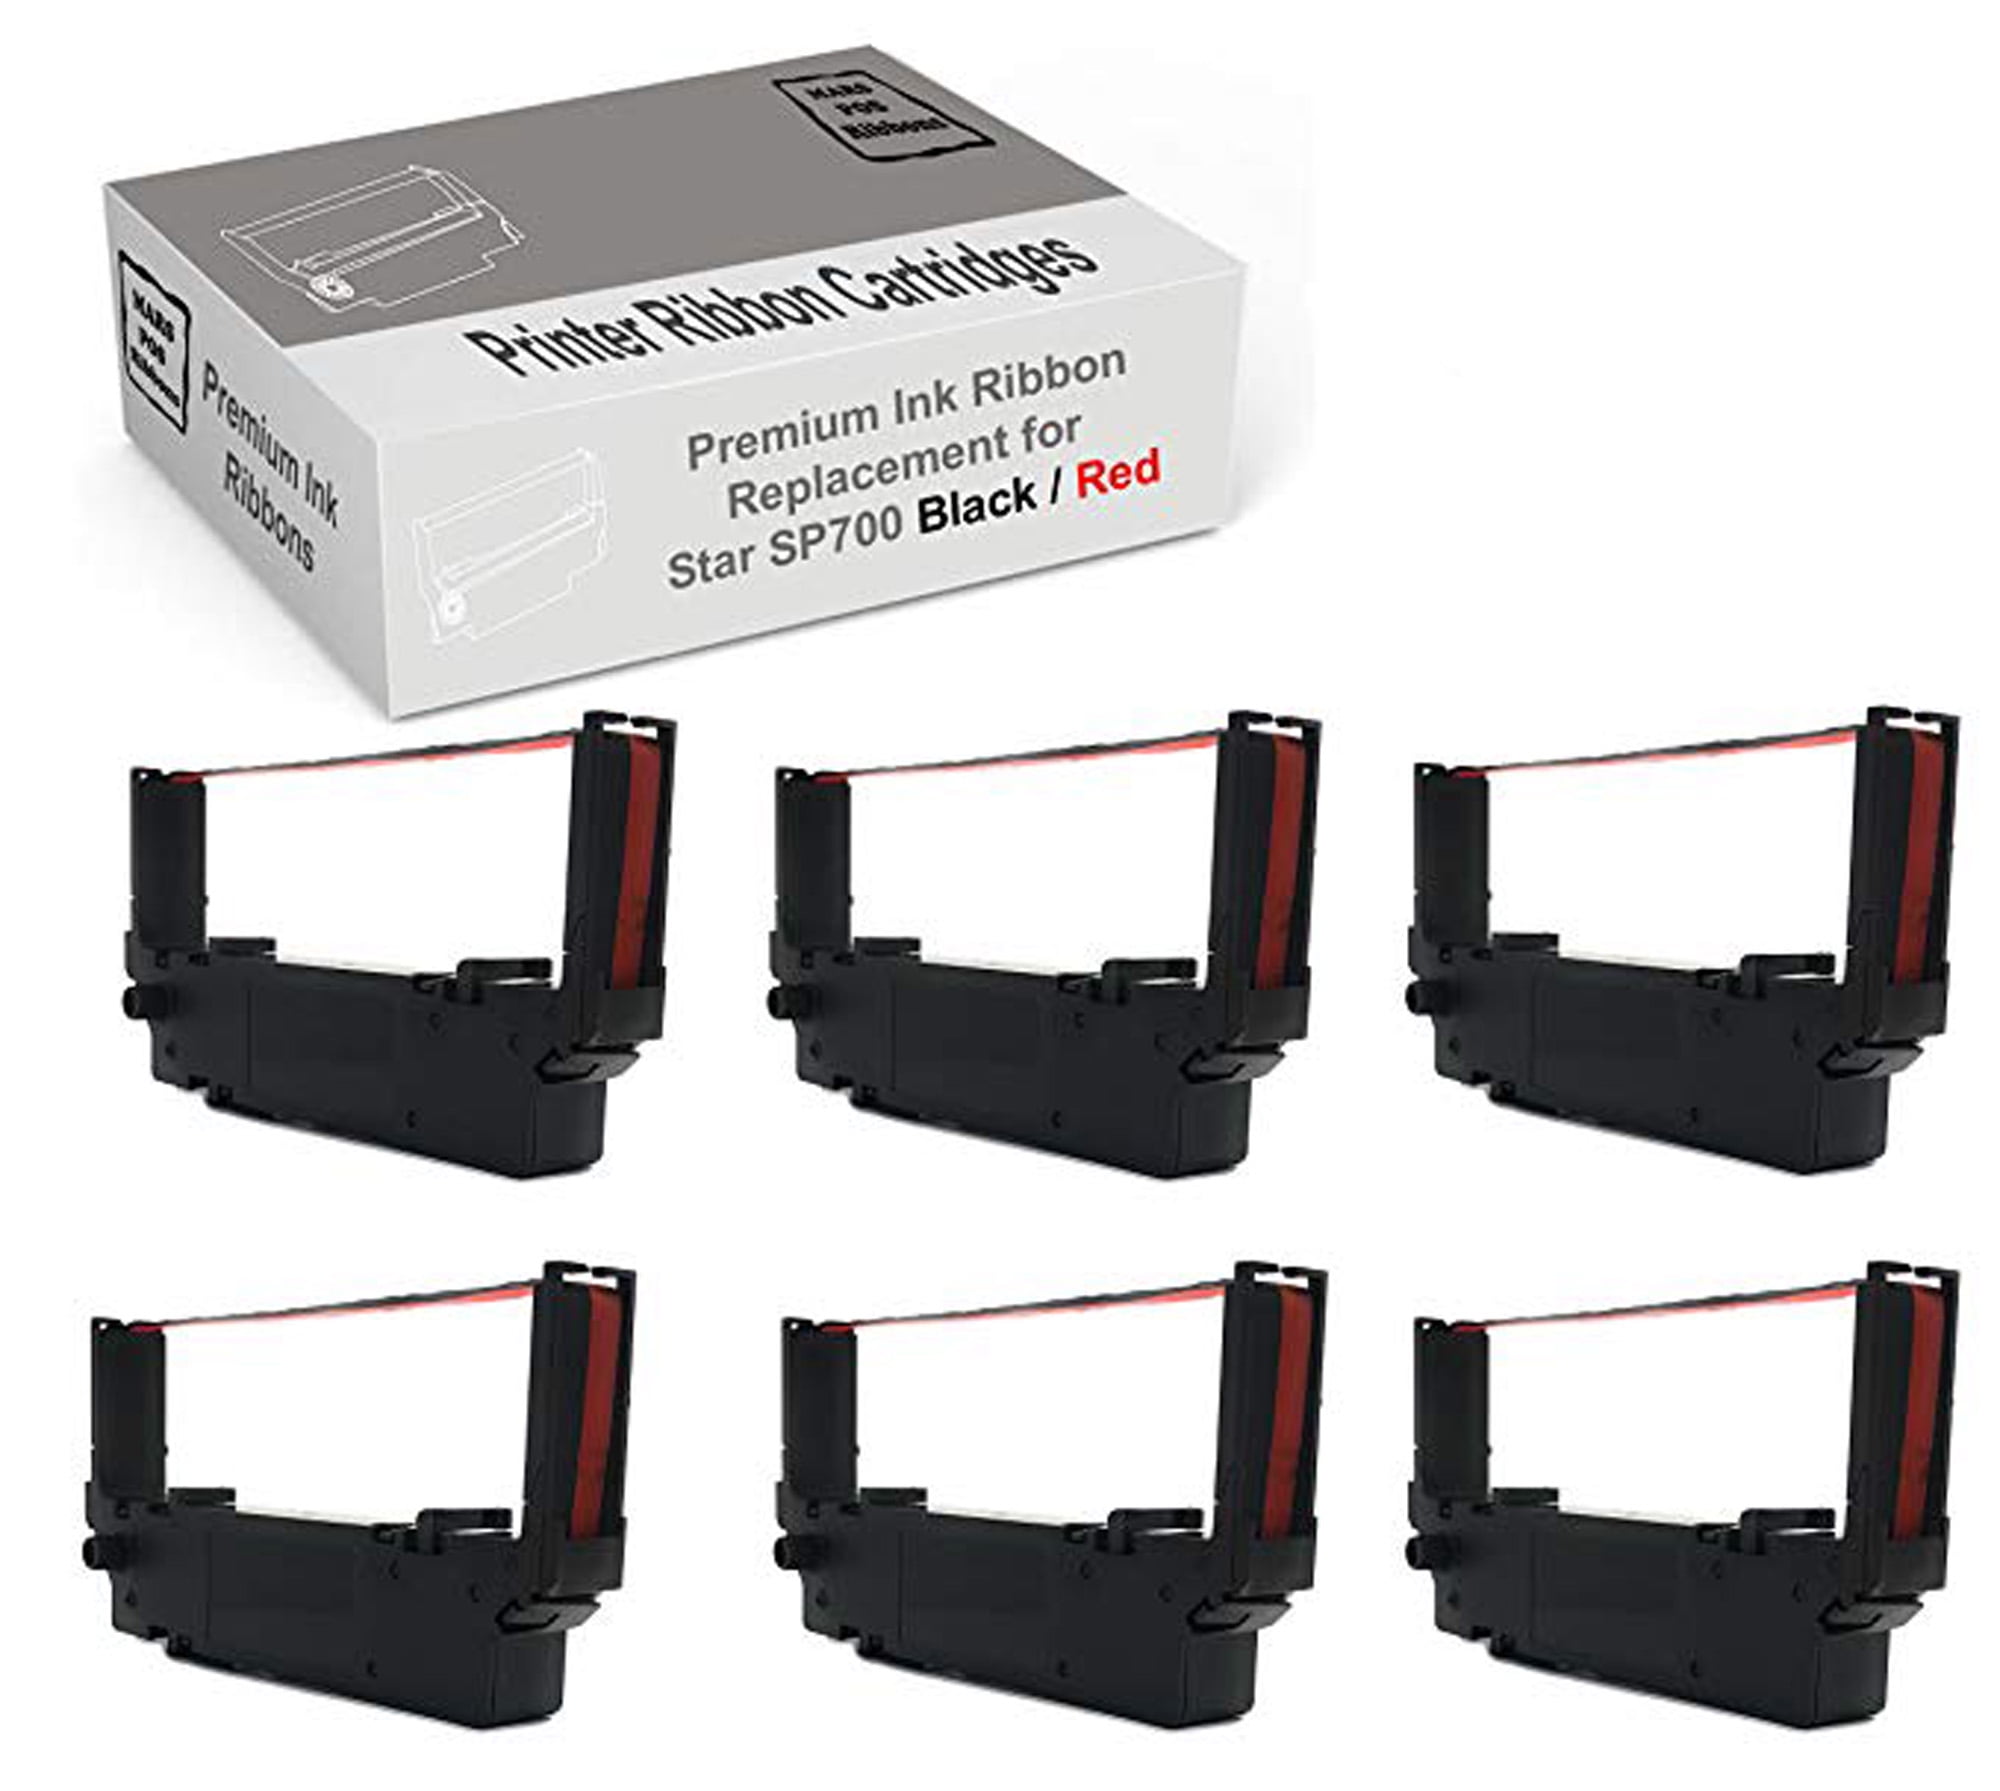 Black and Red, 12-Pack, Sealed Individual Pack ISTAR Compatible Ribbon Replacement for Star RC700 SP700 to use with Sp 700 Sp700 Rc700 Sp712 Sp717 Sp742 Sp747 Printer